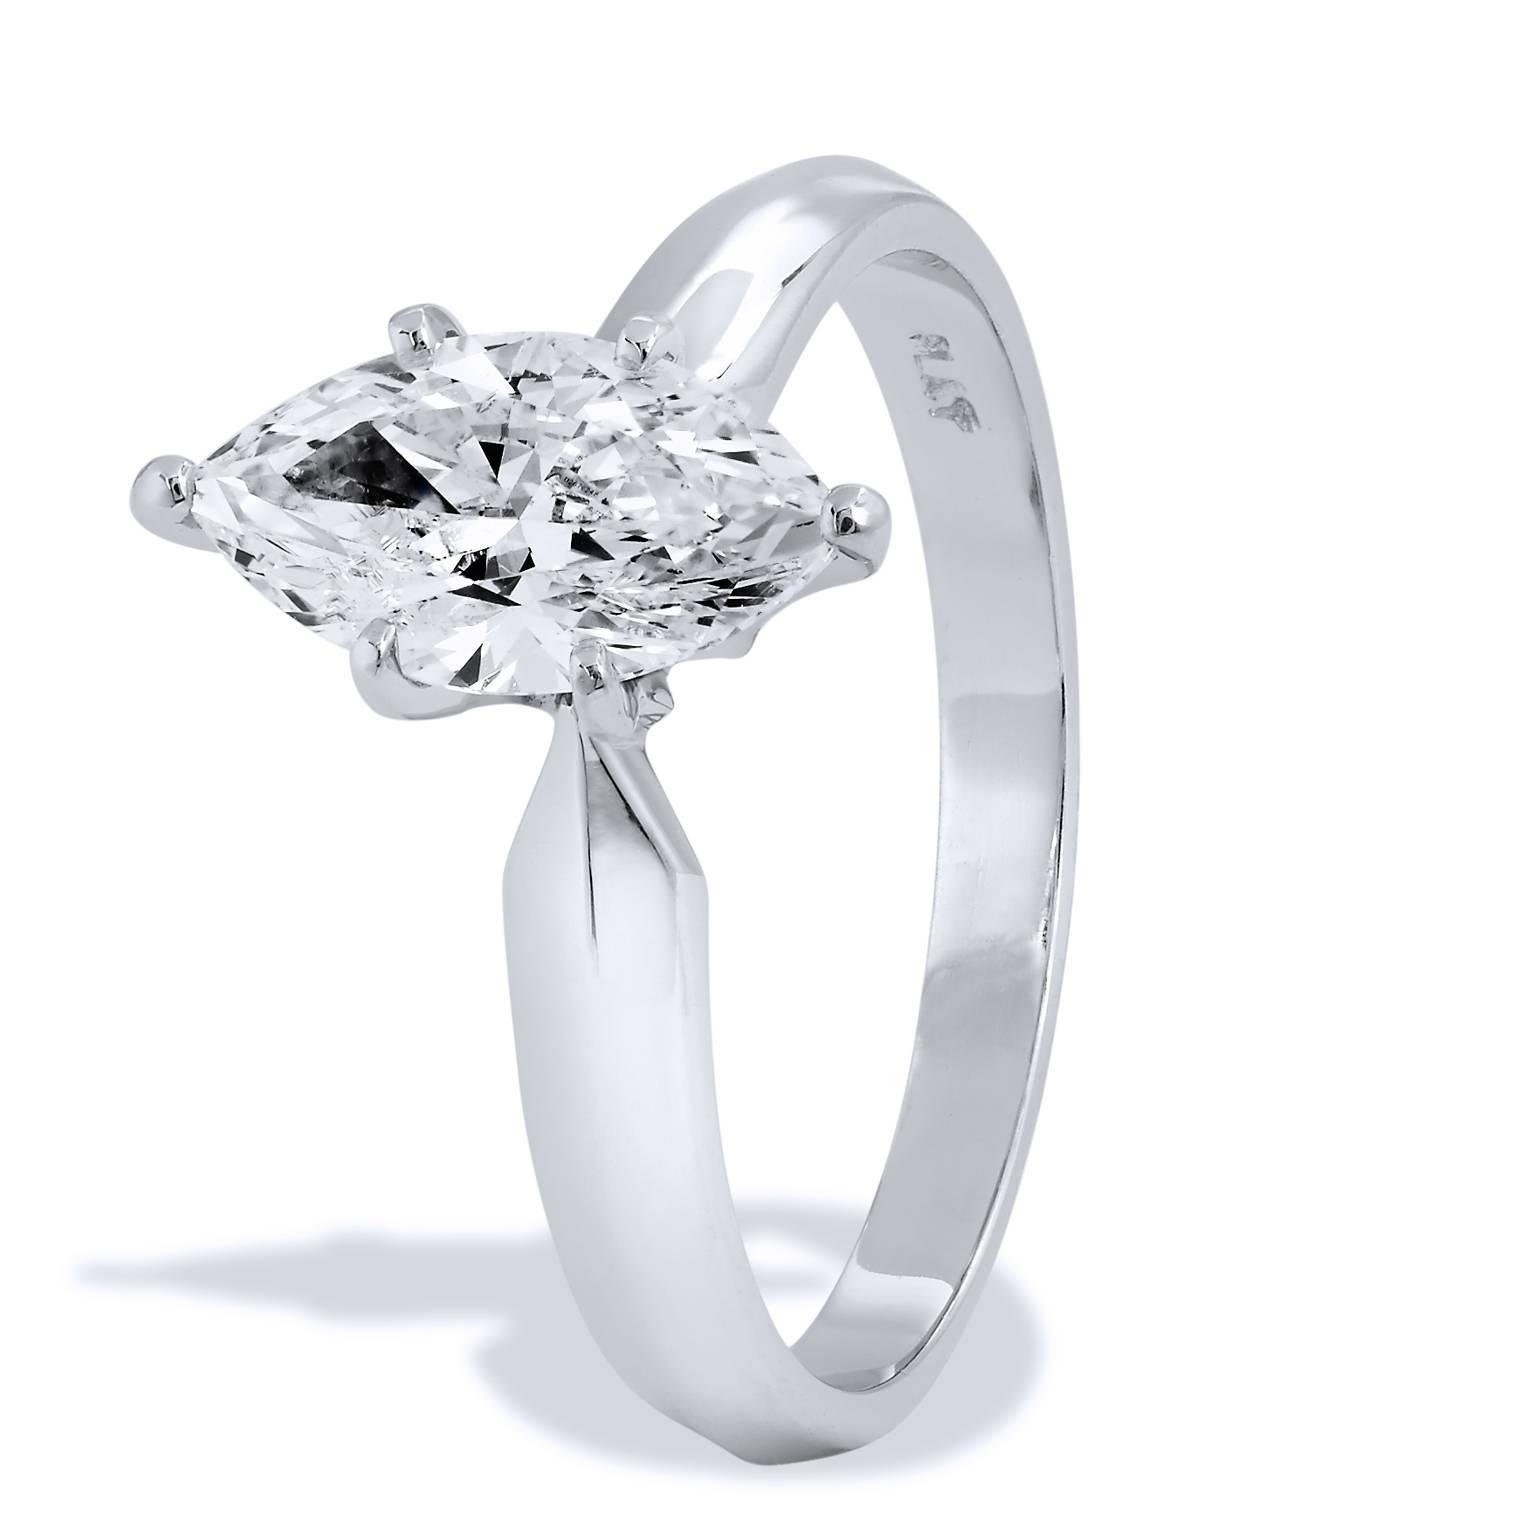 An engagement ring that is stately in appearance but equitable in cost. This engagement ring features a 1.10 carat marquise cut diamond solitaire (E/I1; GIA #1126762482) on a platinum pinched shank. Giving the illusion of a larger diamond- this